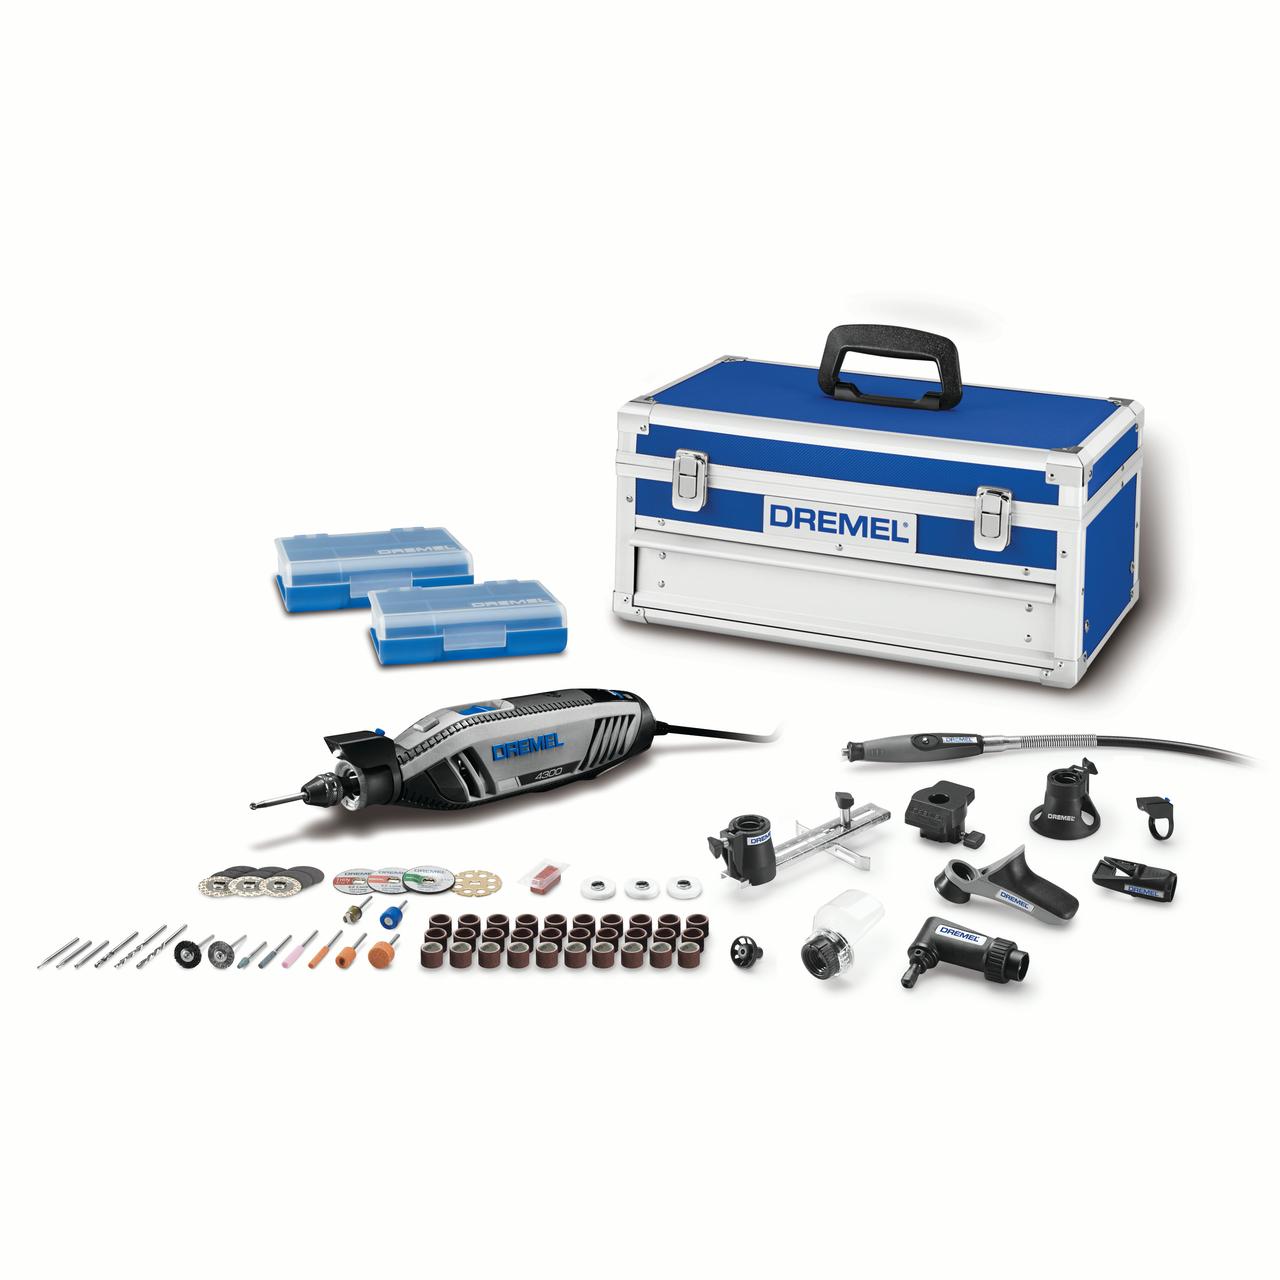 Dremel 4300-9/64 Corded Variable Speed Rotary Tool Kit with Flex Shaft and Hard Storage Case, High Power & Performance, Variable Speed - Engraver, Etcher, Sander, and Polisher - image 1 of 11